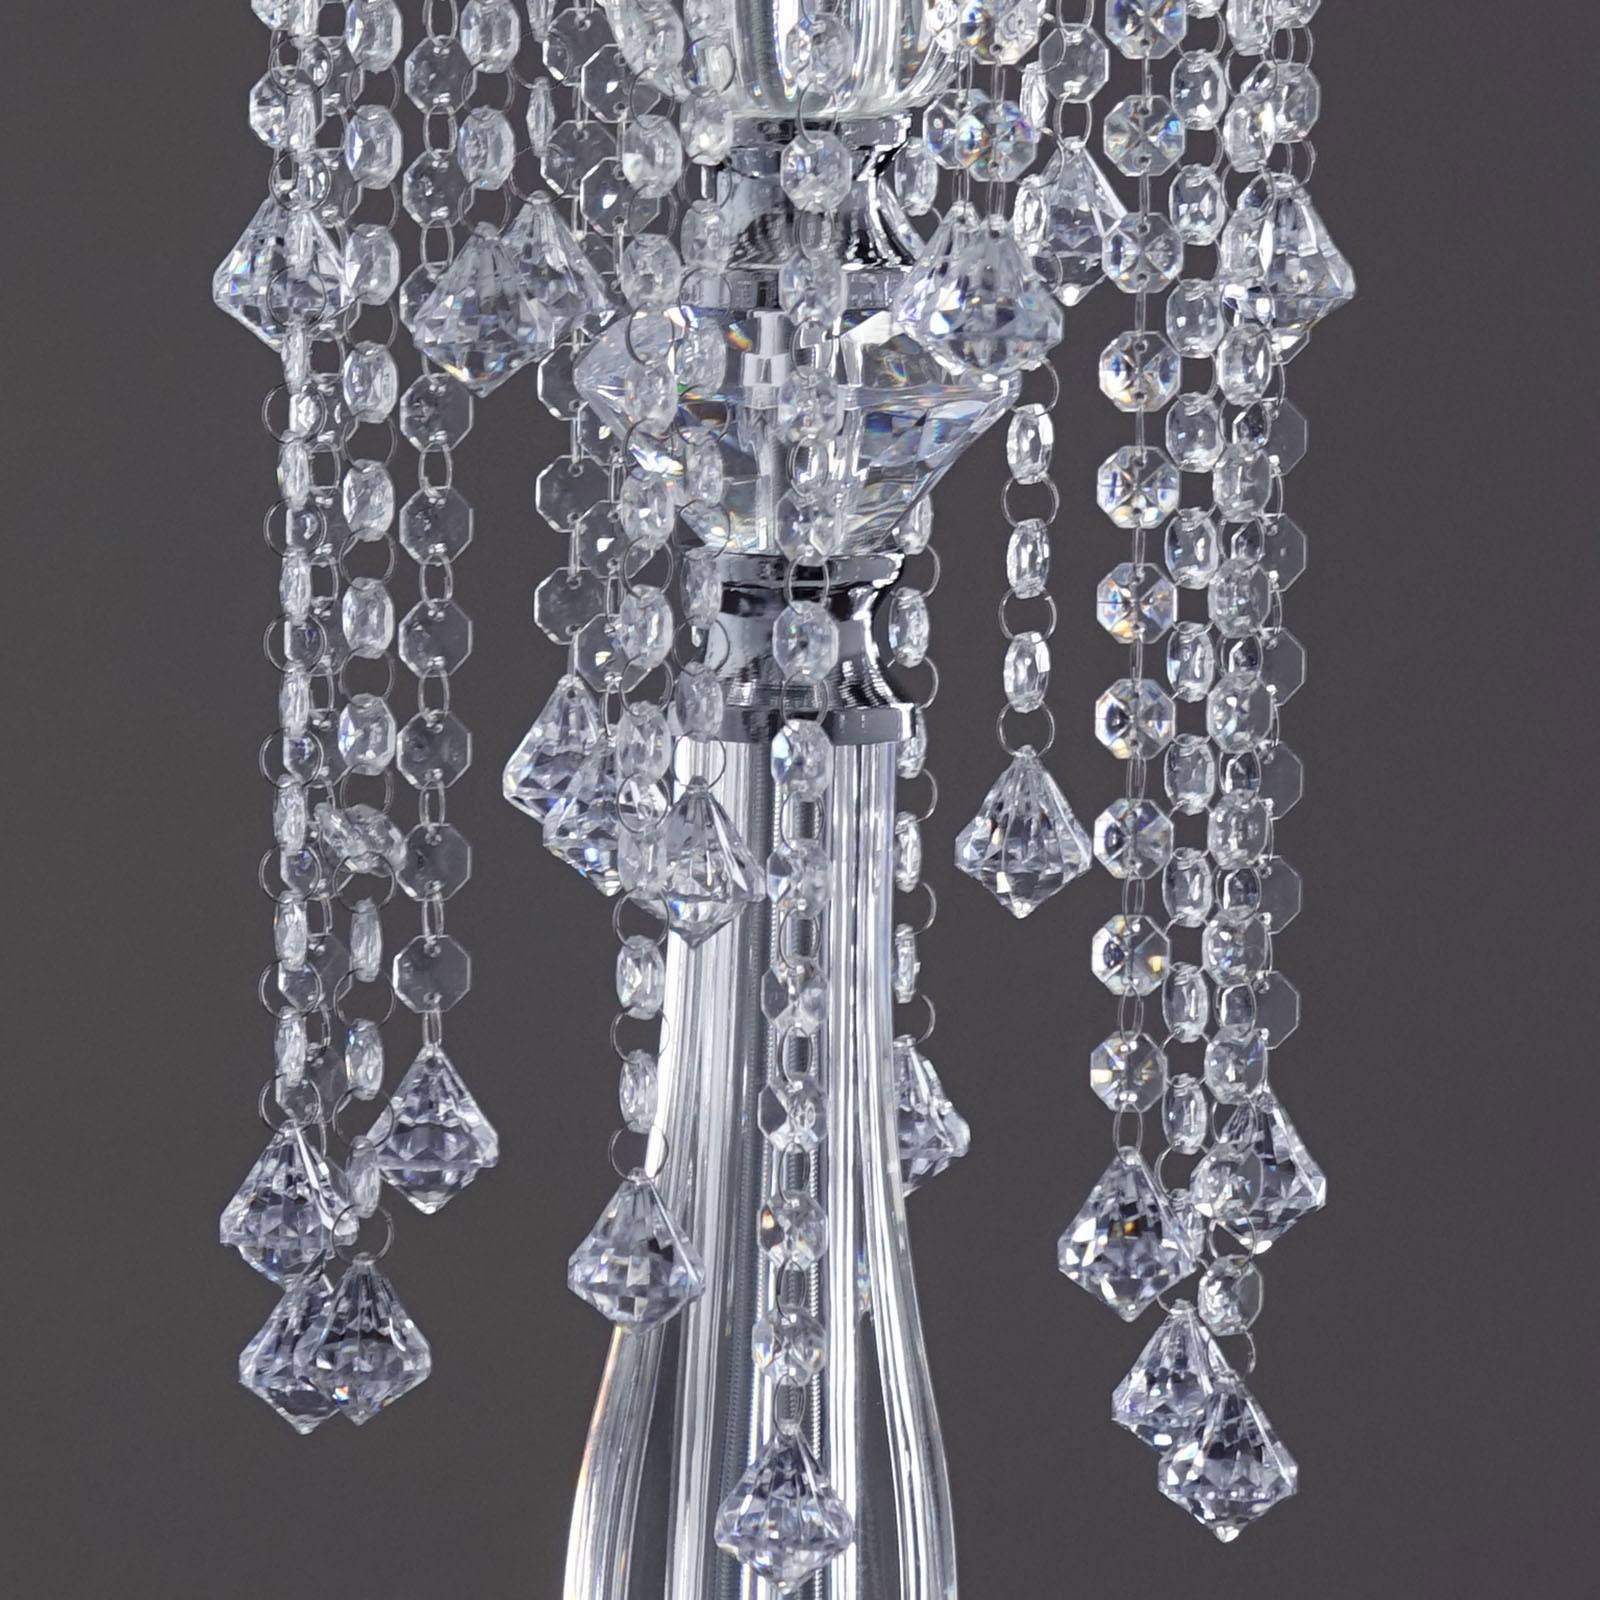 19 Hanging Crystals with Large Teardrops Chandelier - 28